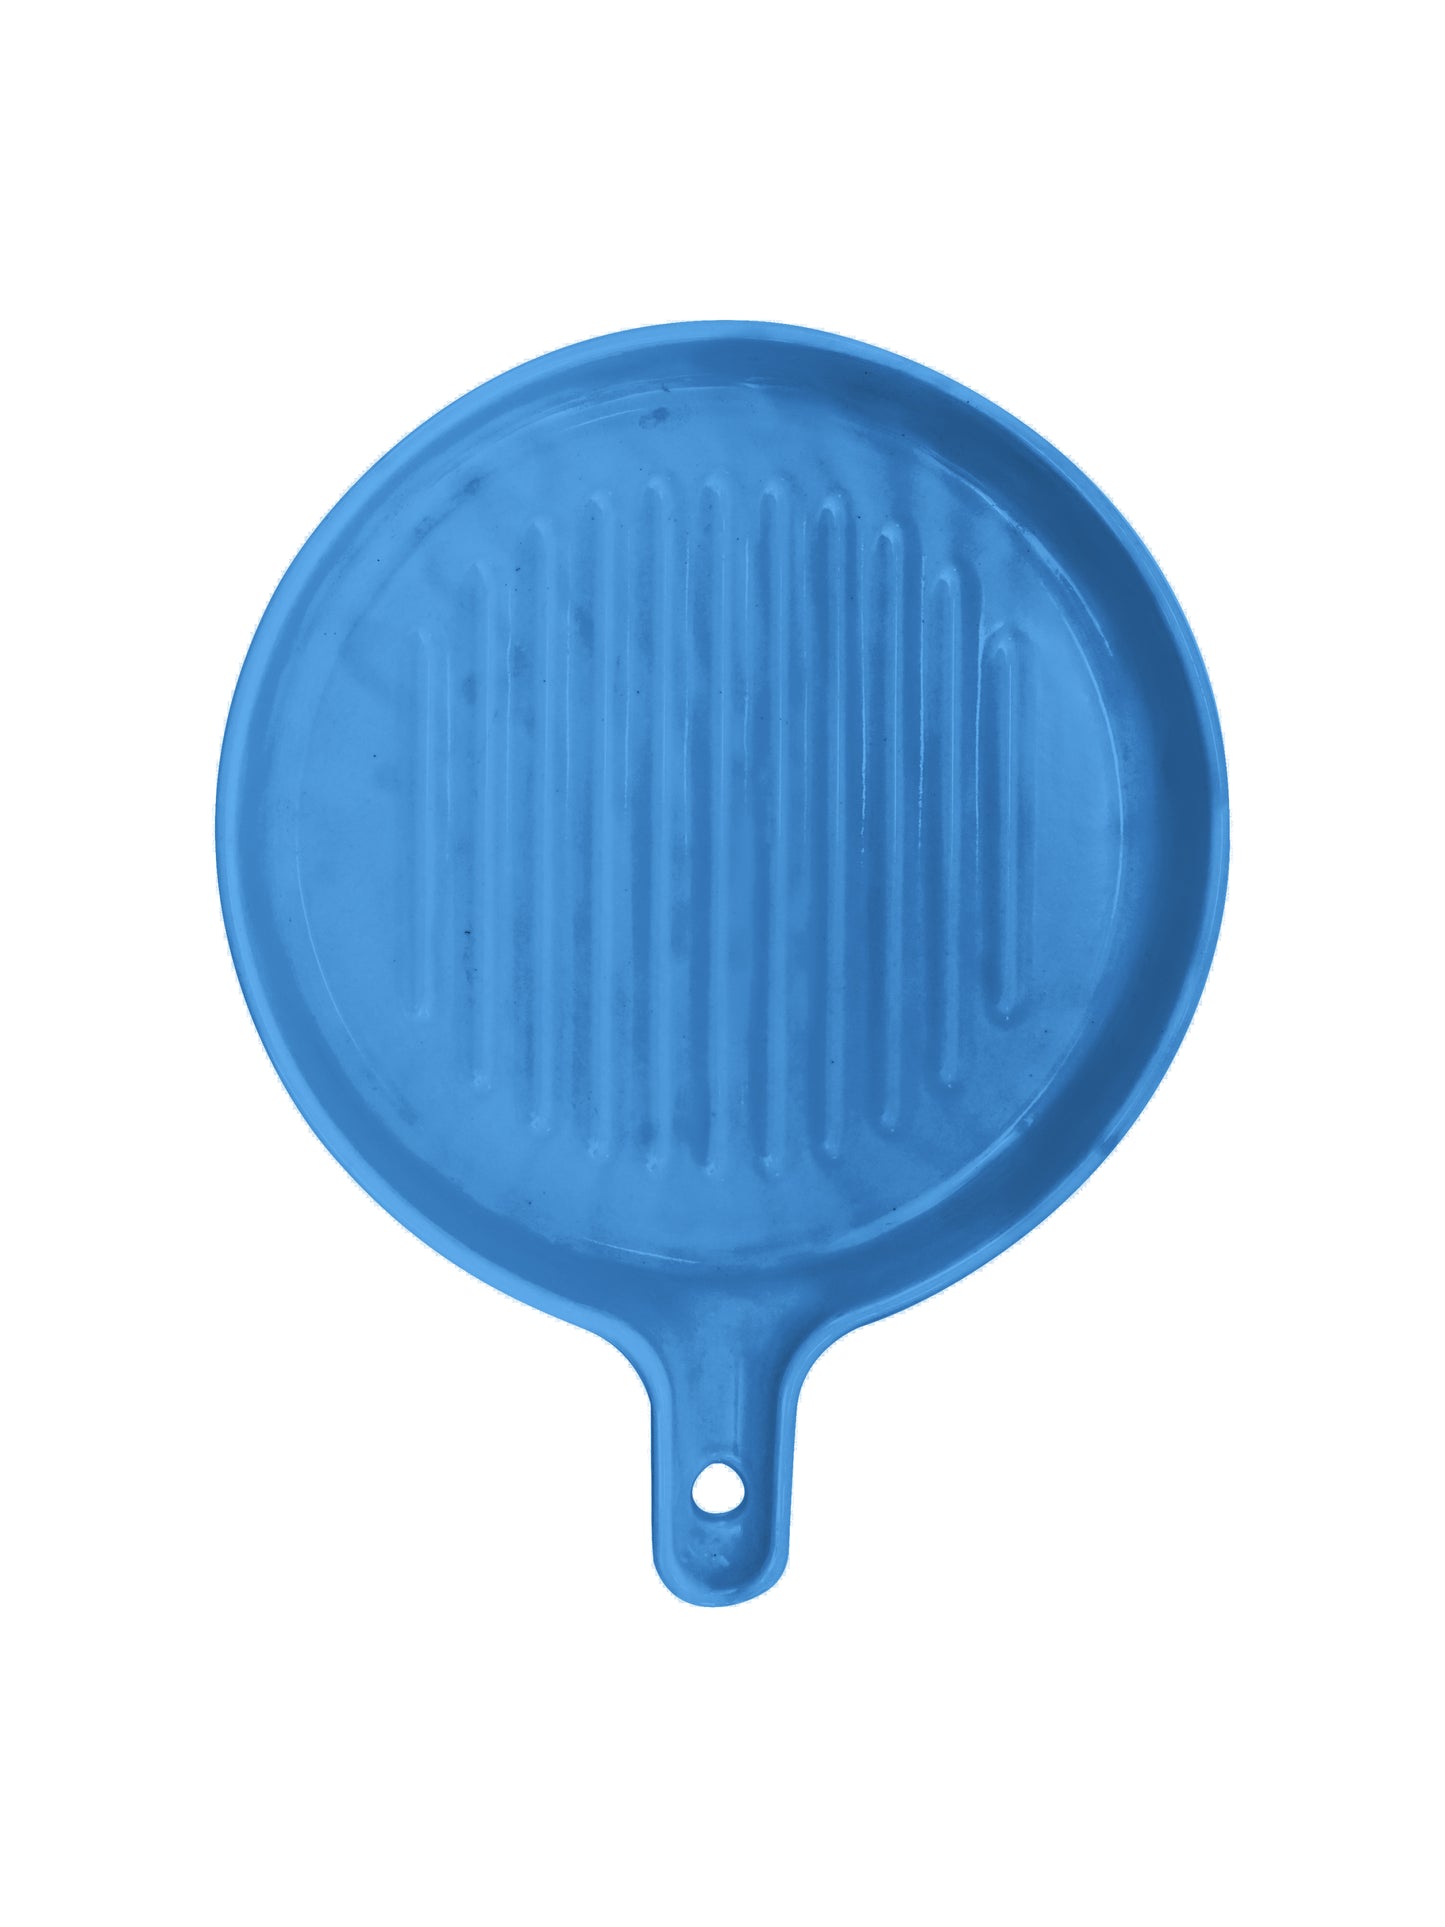 Ceramic Round Grill Plates for Serving, Blue